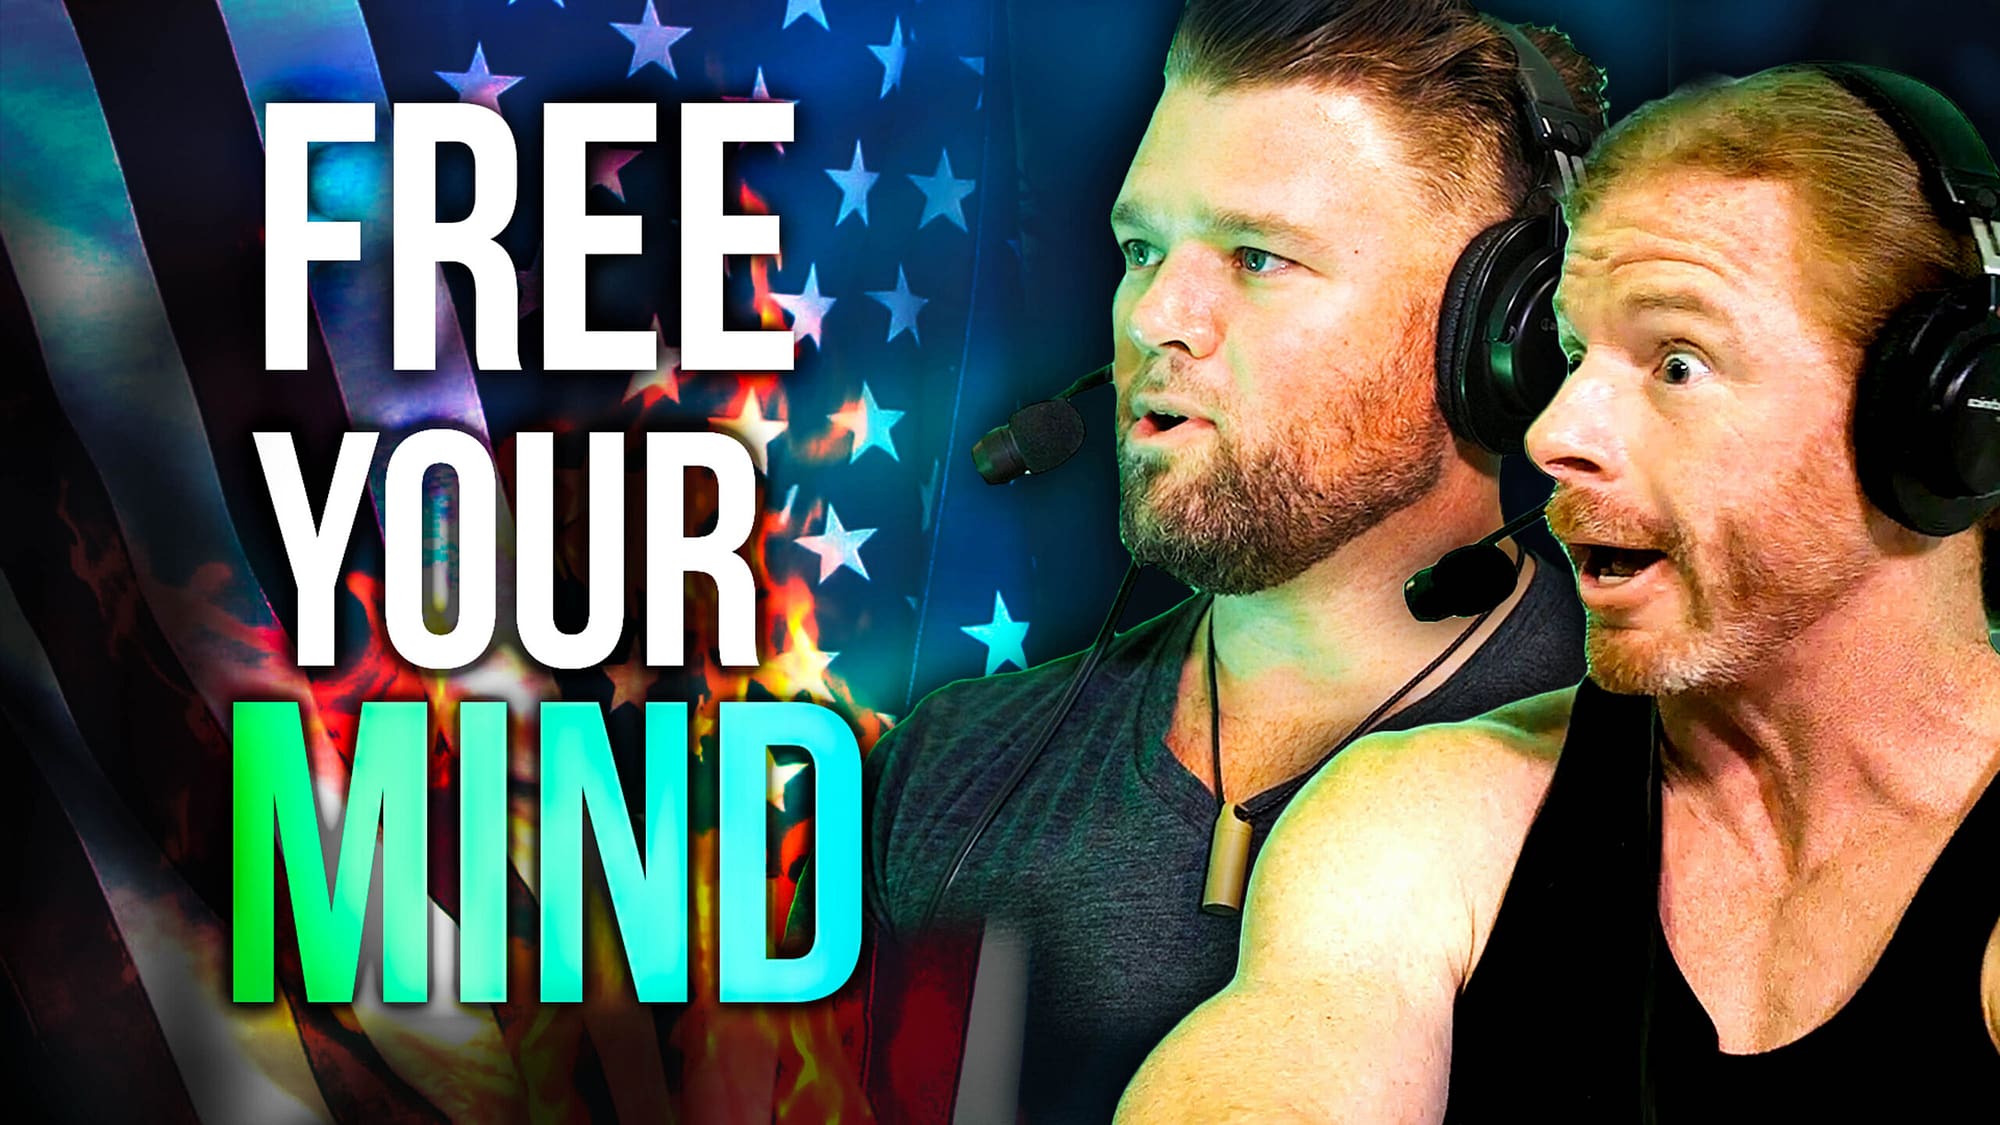 JP Sears | This Is How Media HIJACKS Your Mind: Stop Censoring Yourself & Heal The Tyrant Within